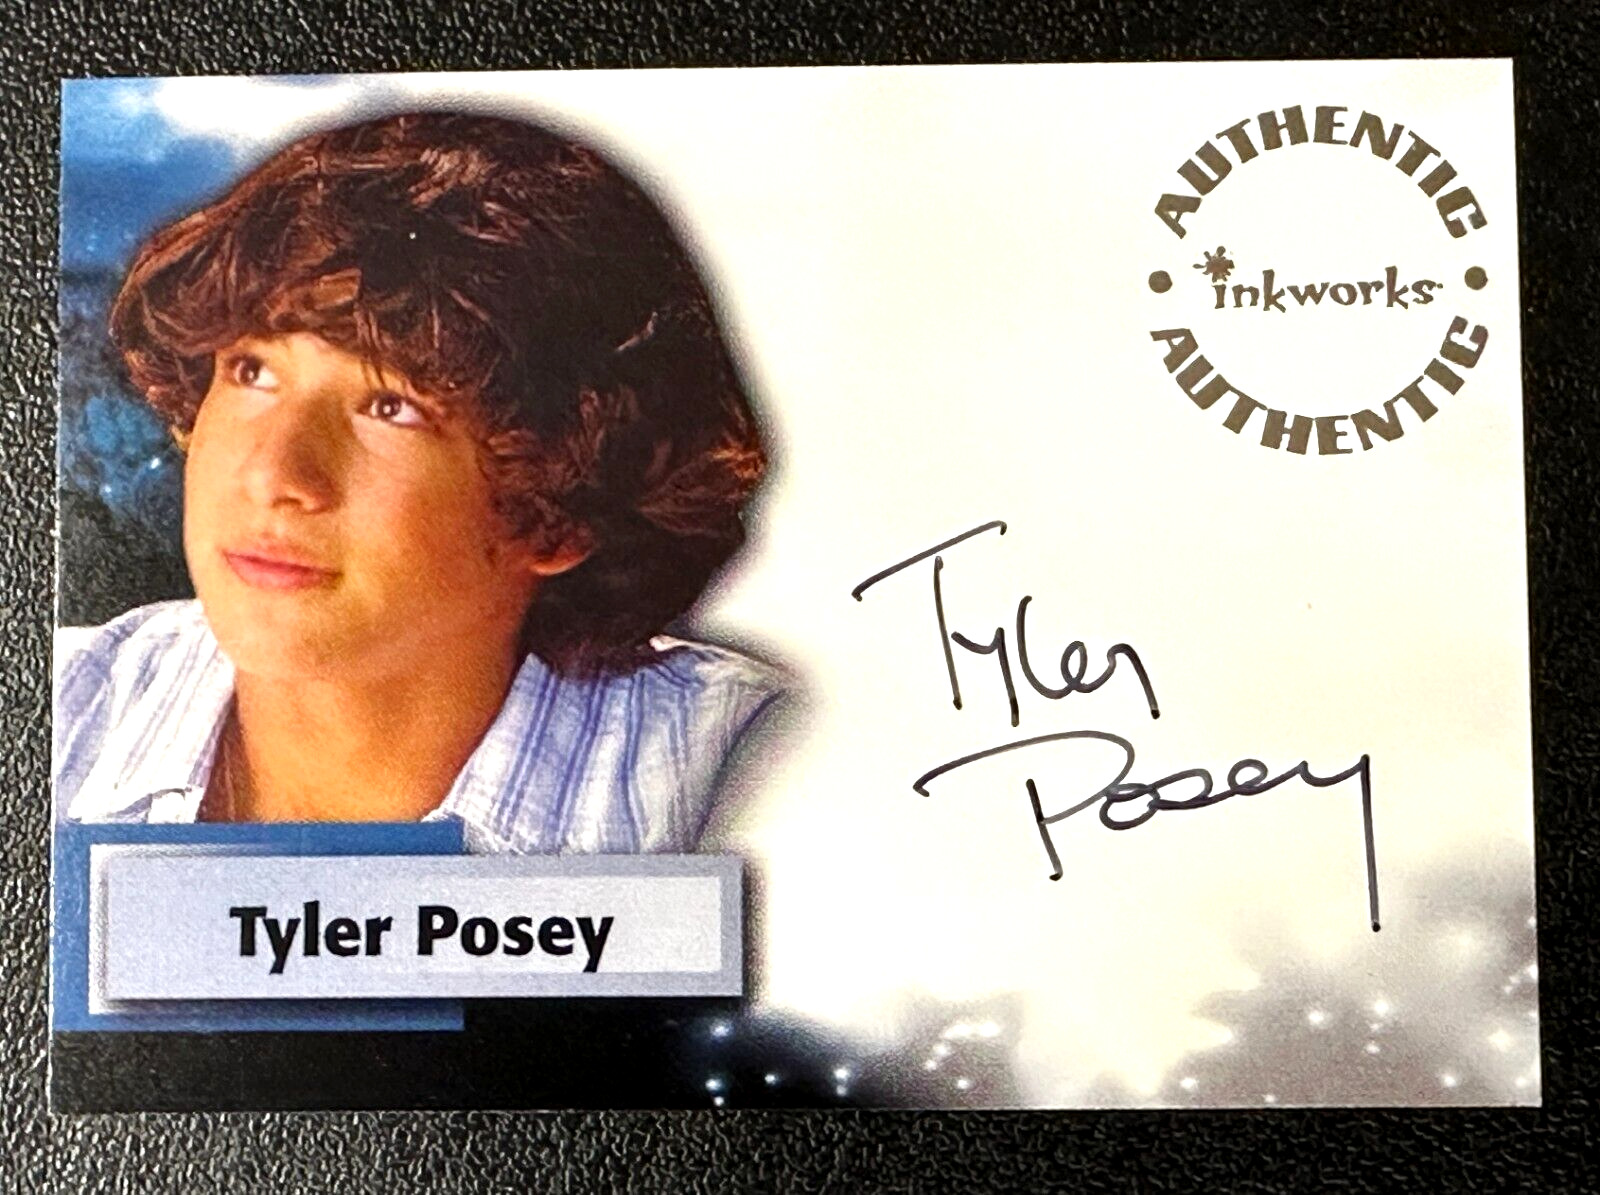 2008 Smallville Season 6 Autograph Card Signed by Tyler Posey (Javier)